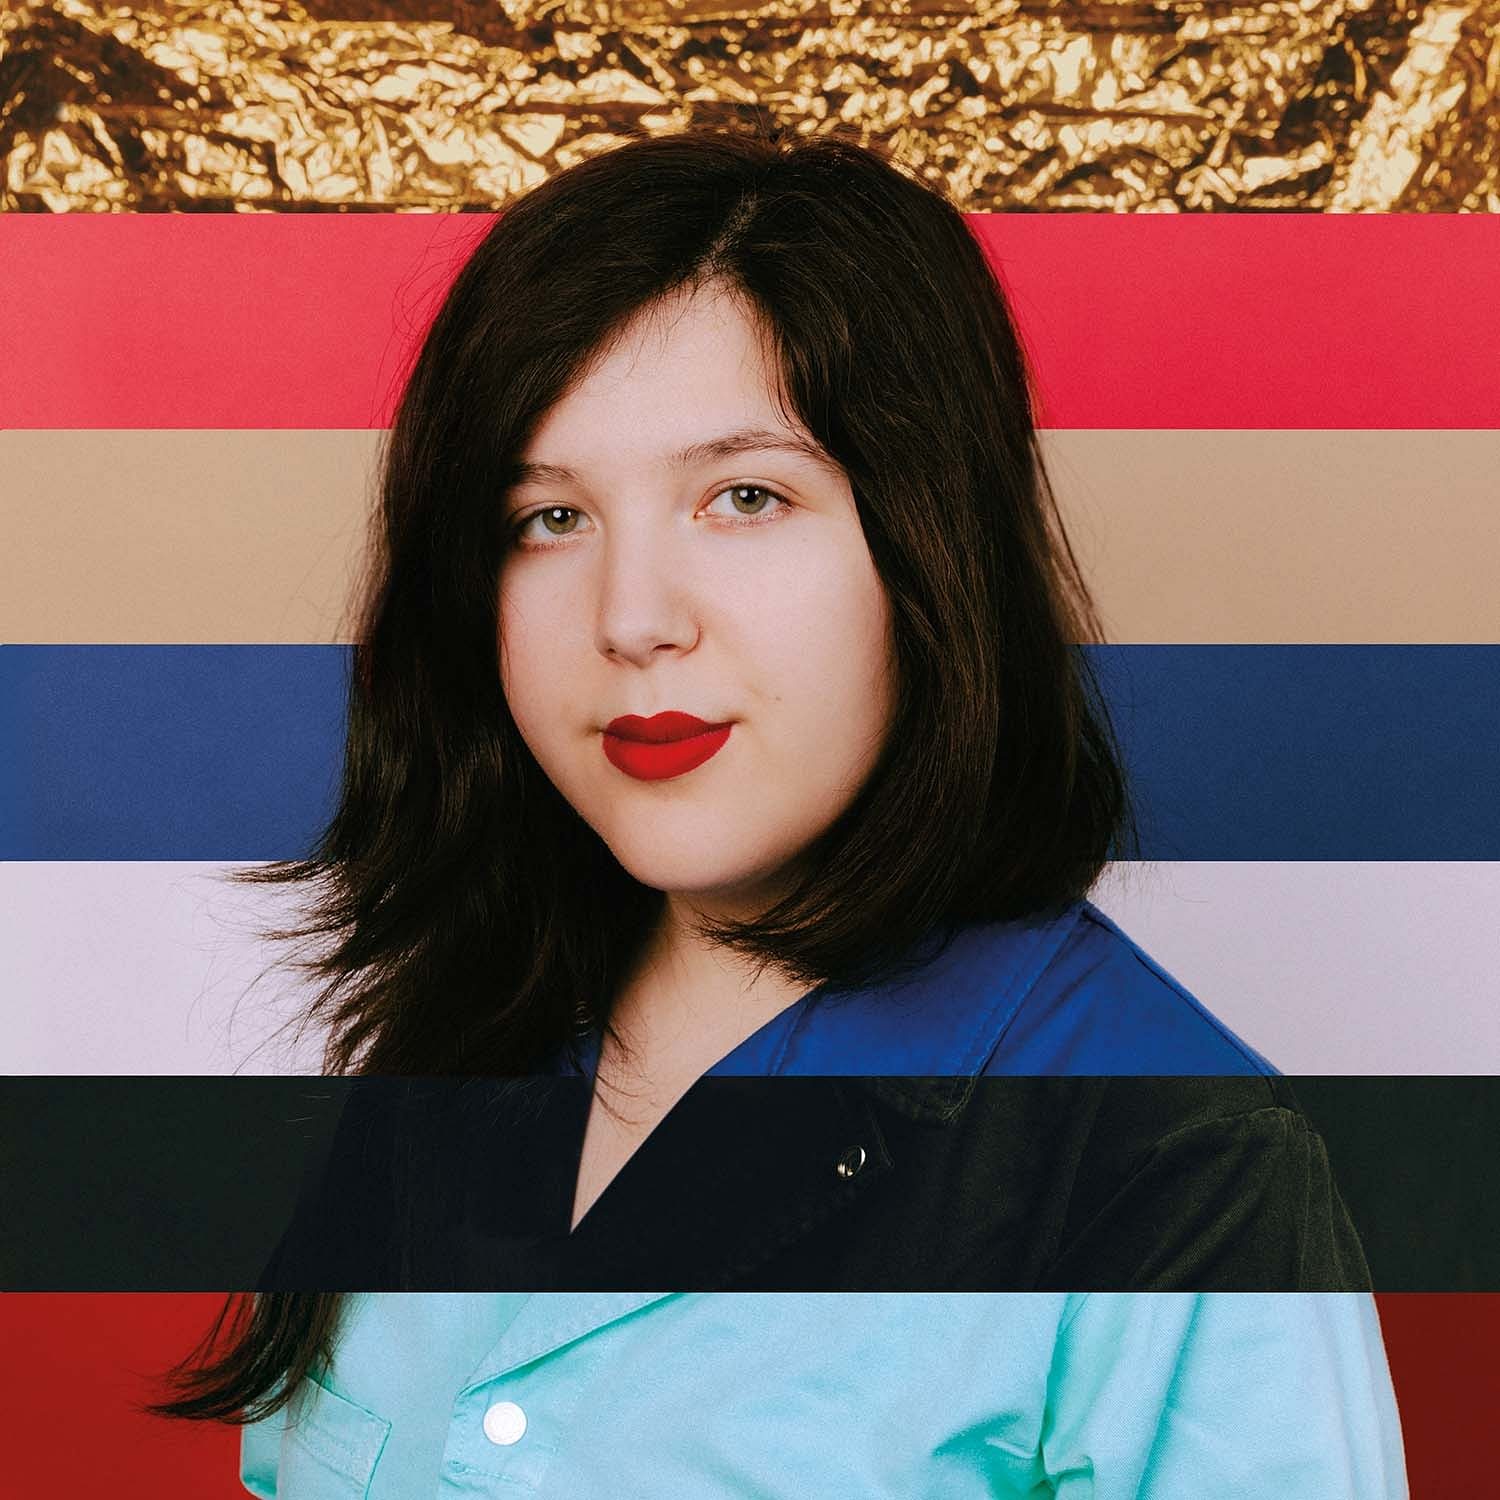 Lucy Dacus: “Night Shift” Track Review